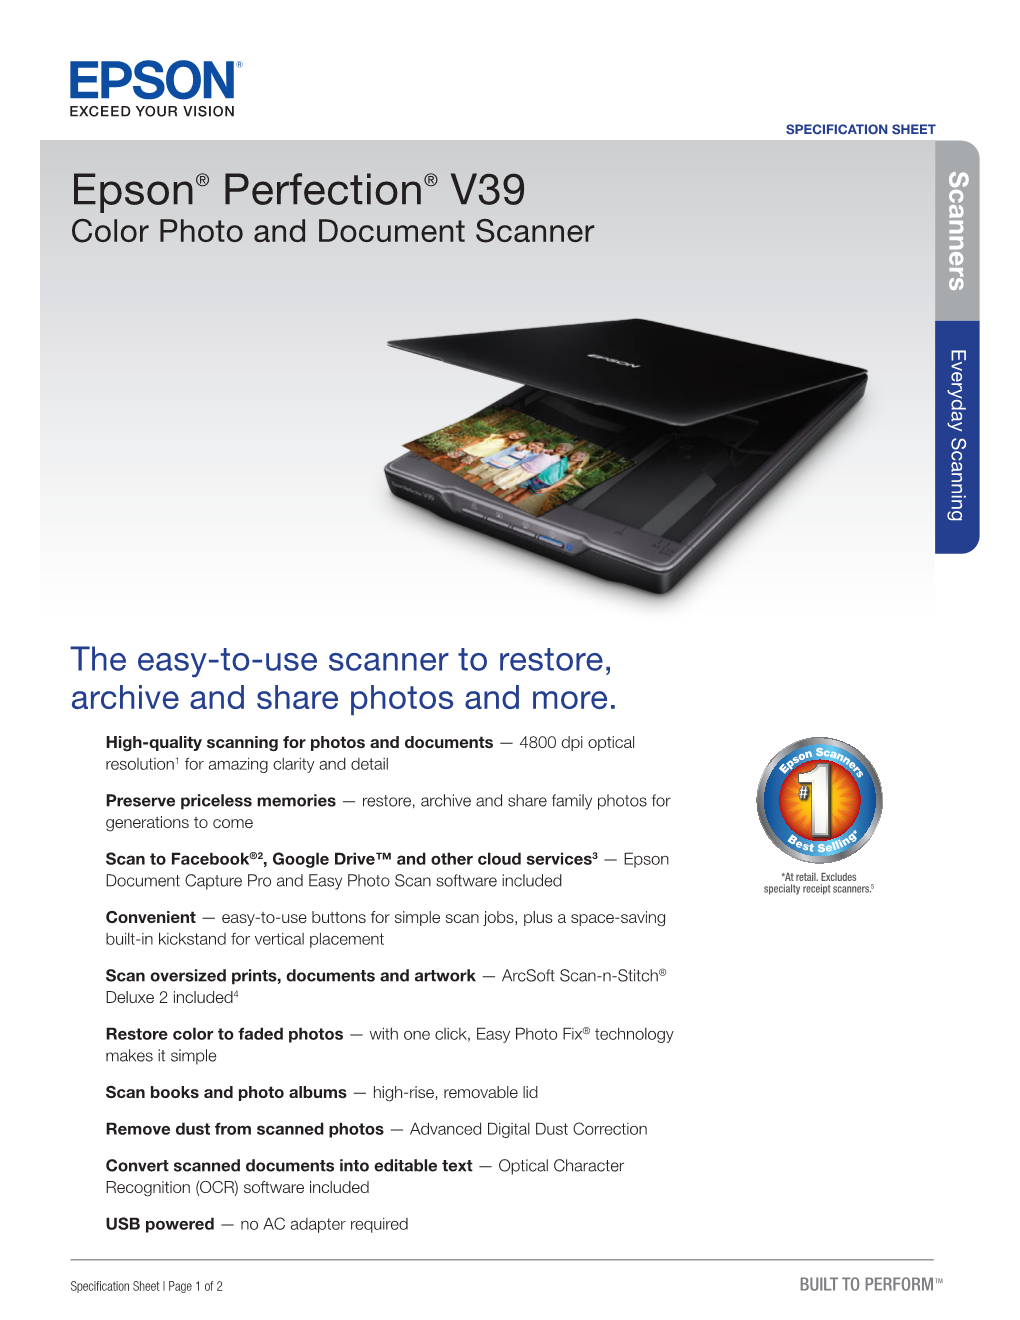 Epson® Perfection® V39 Color Photo and Document Scanner Everyday Scanning